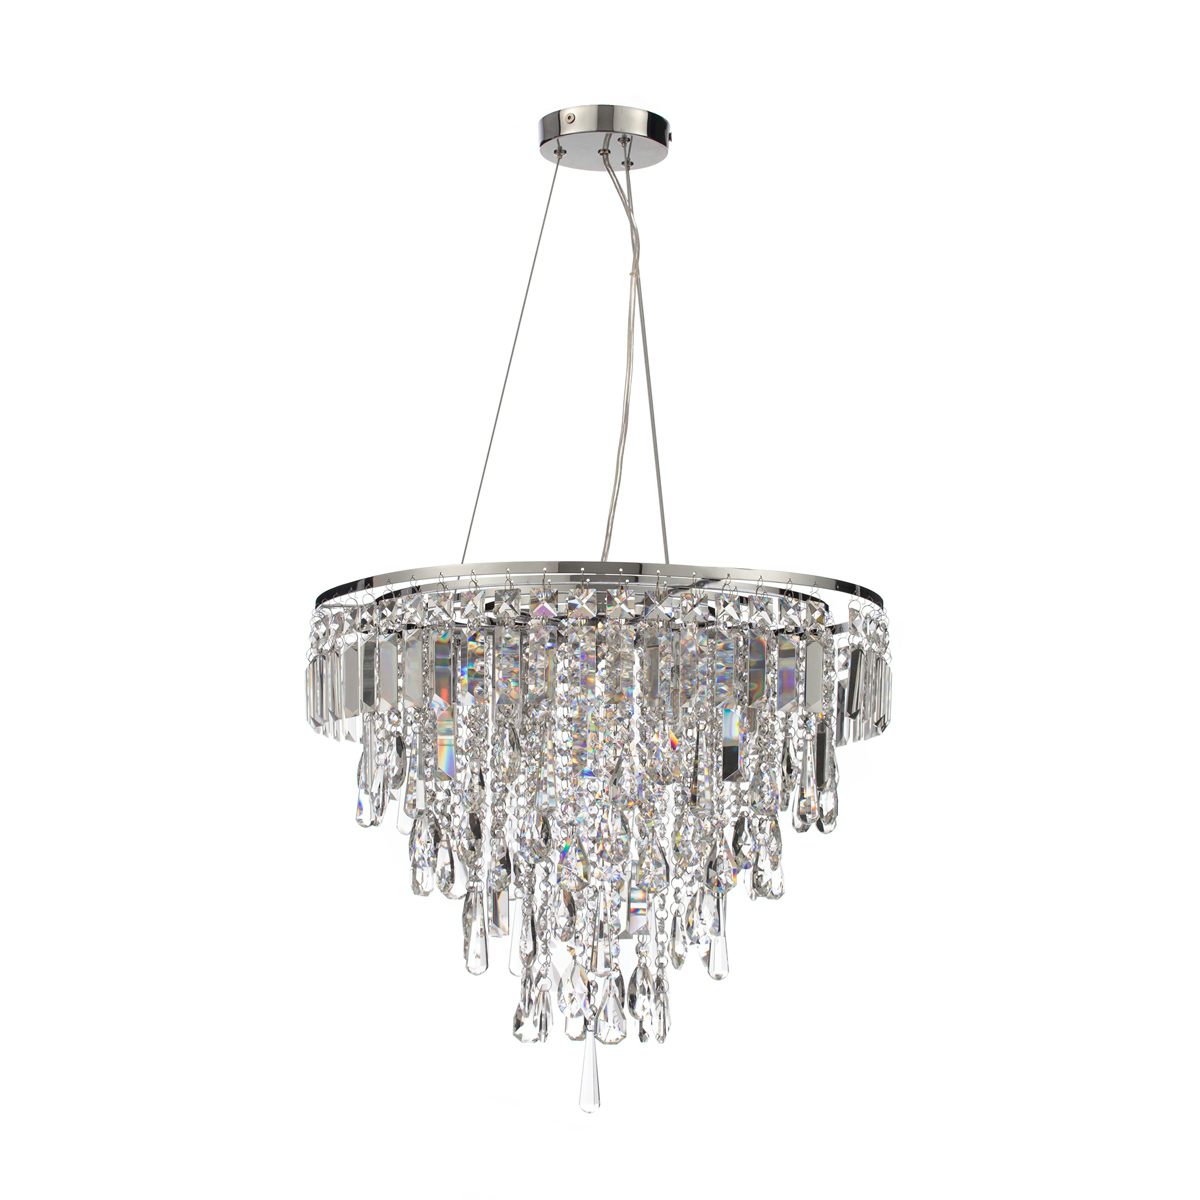 Marquis by Waterford Bresna 6 light bathroom chandelier